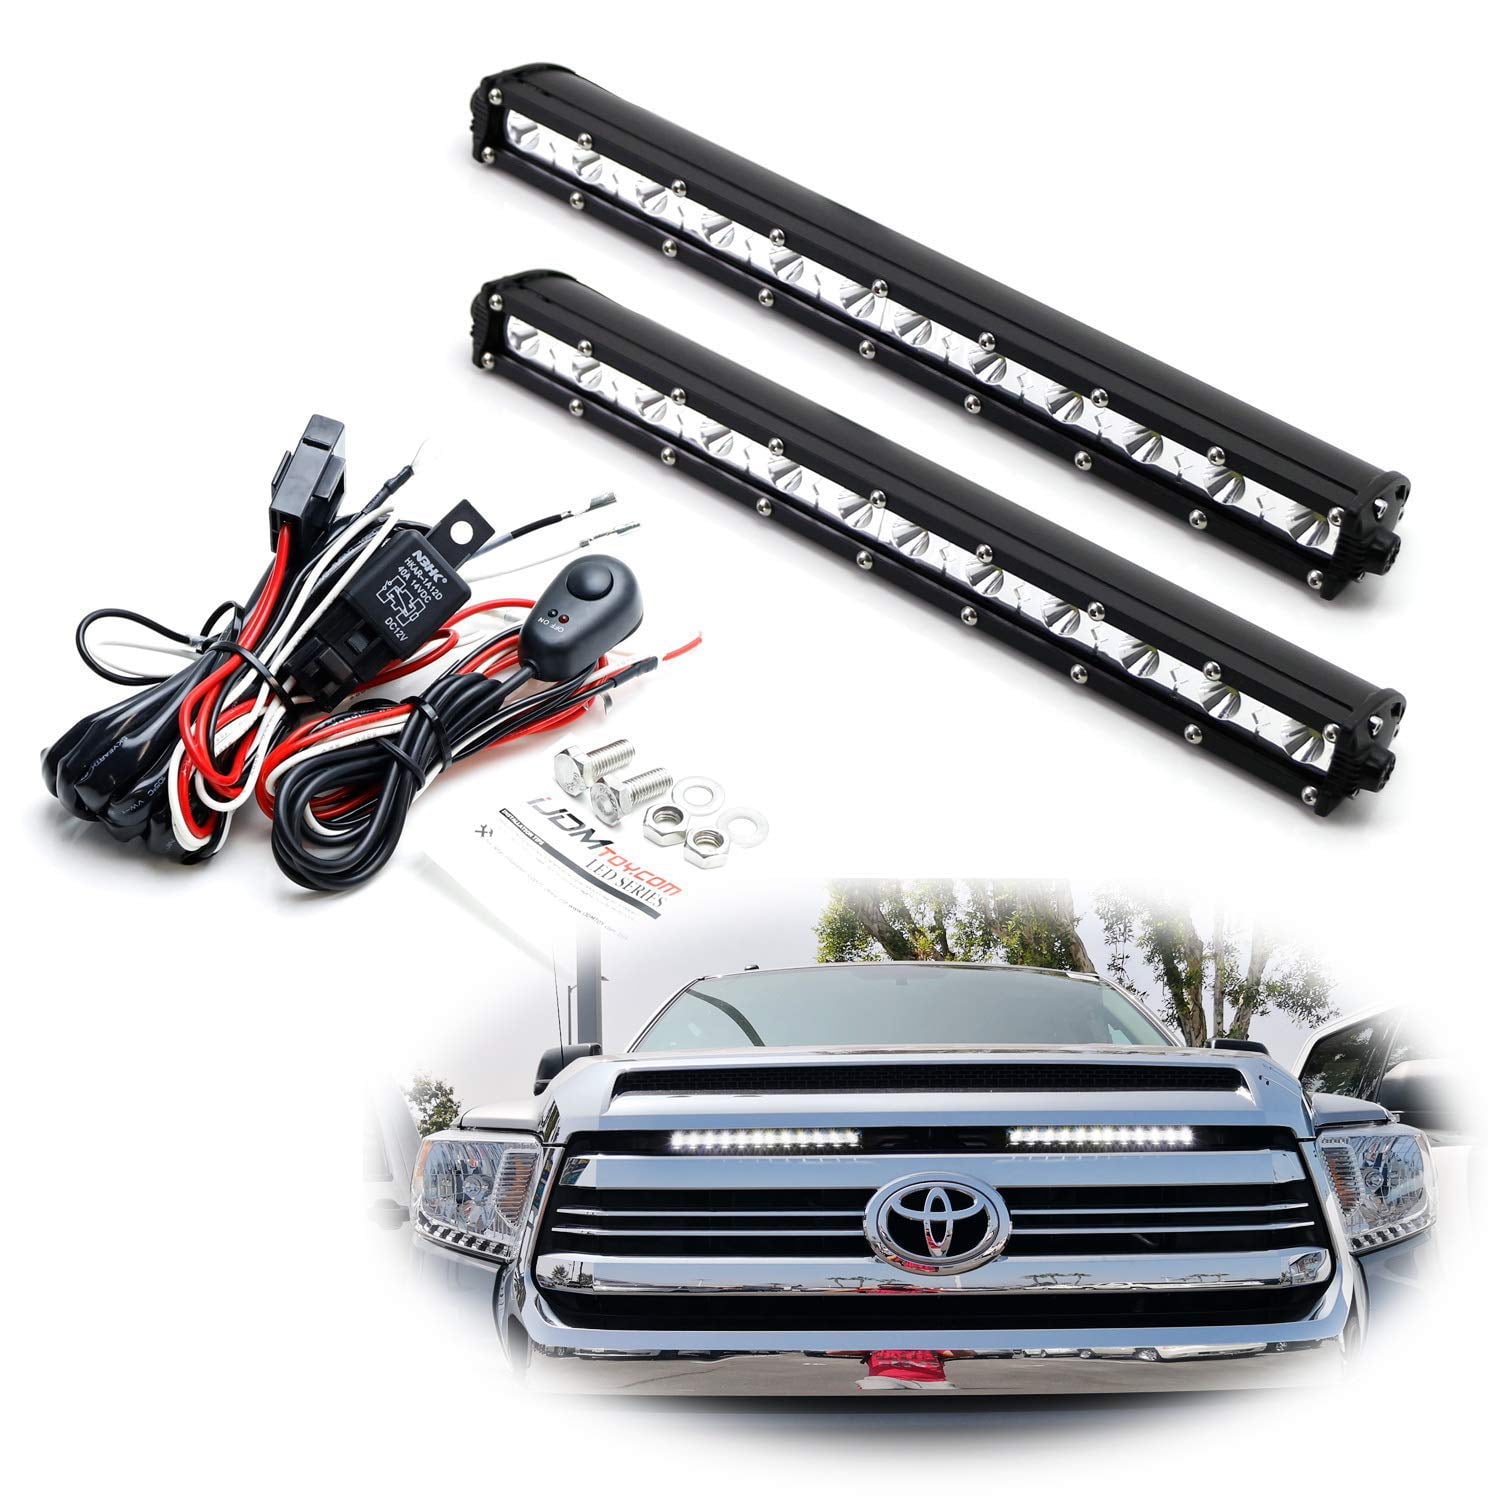 36W High Power LED Lightbars Bumper Frame Mount Brackets 2014-up Tundra, On/Off Switch Wiring 2 iJDMTOY Rear Bumper Mount Searchlight Reverse LED Light Bars Compatible With 2012-up Toyota Tacoma 